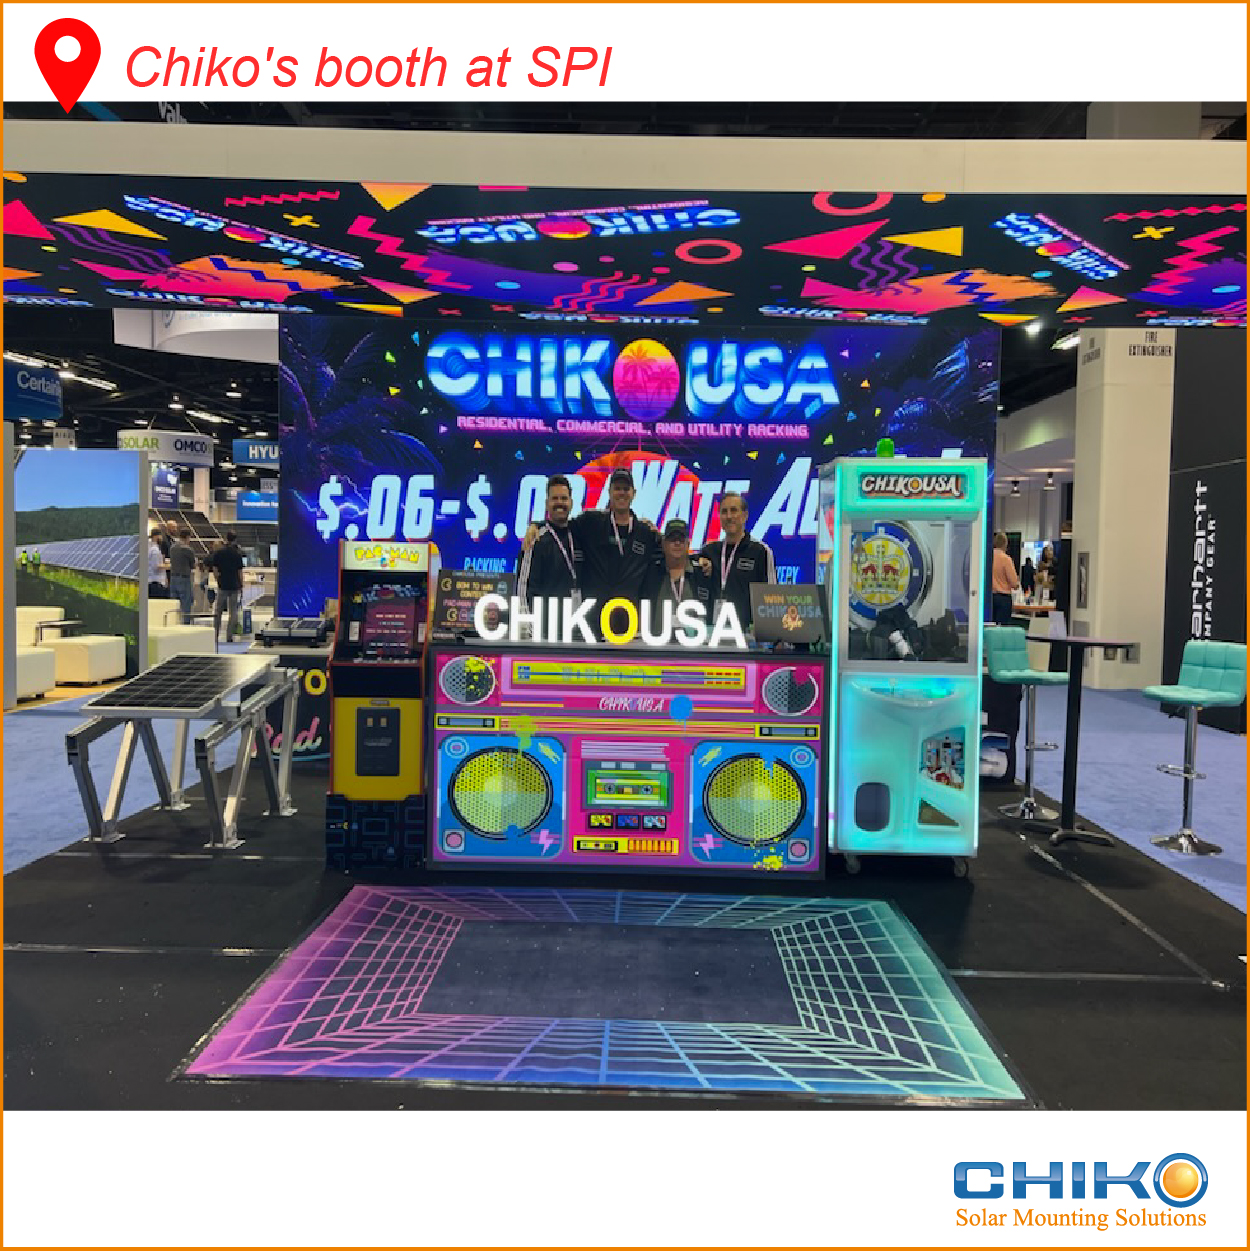 2022 US SPI CHIKO show was successfully completed